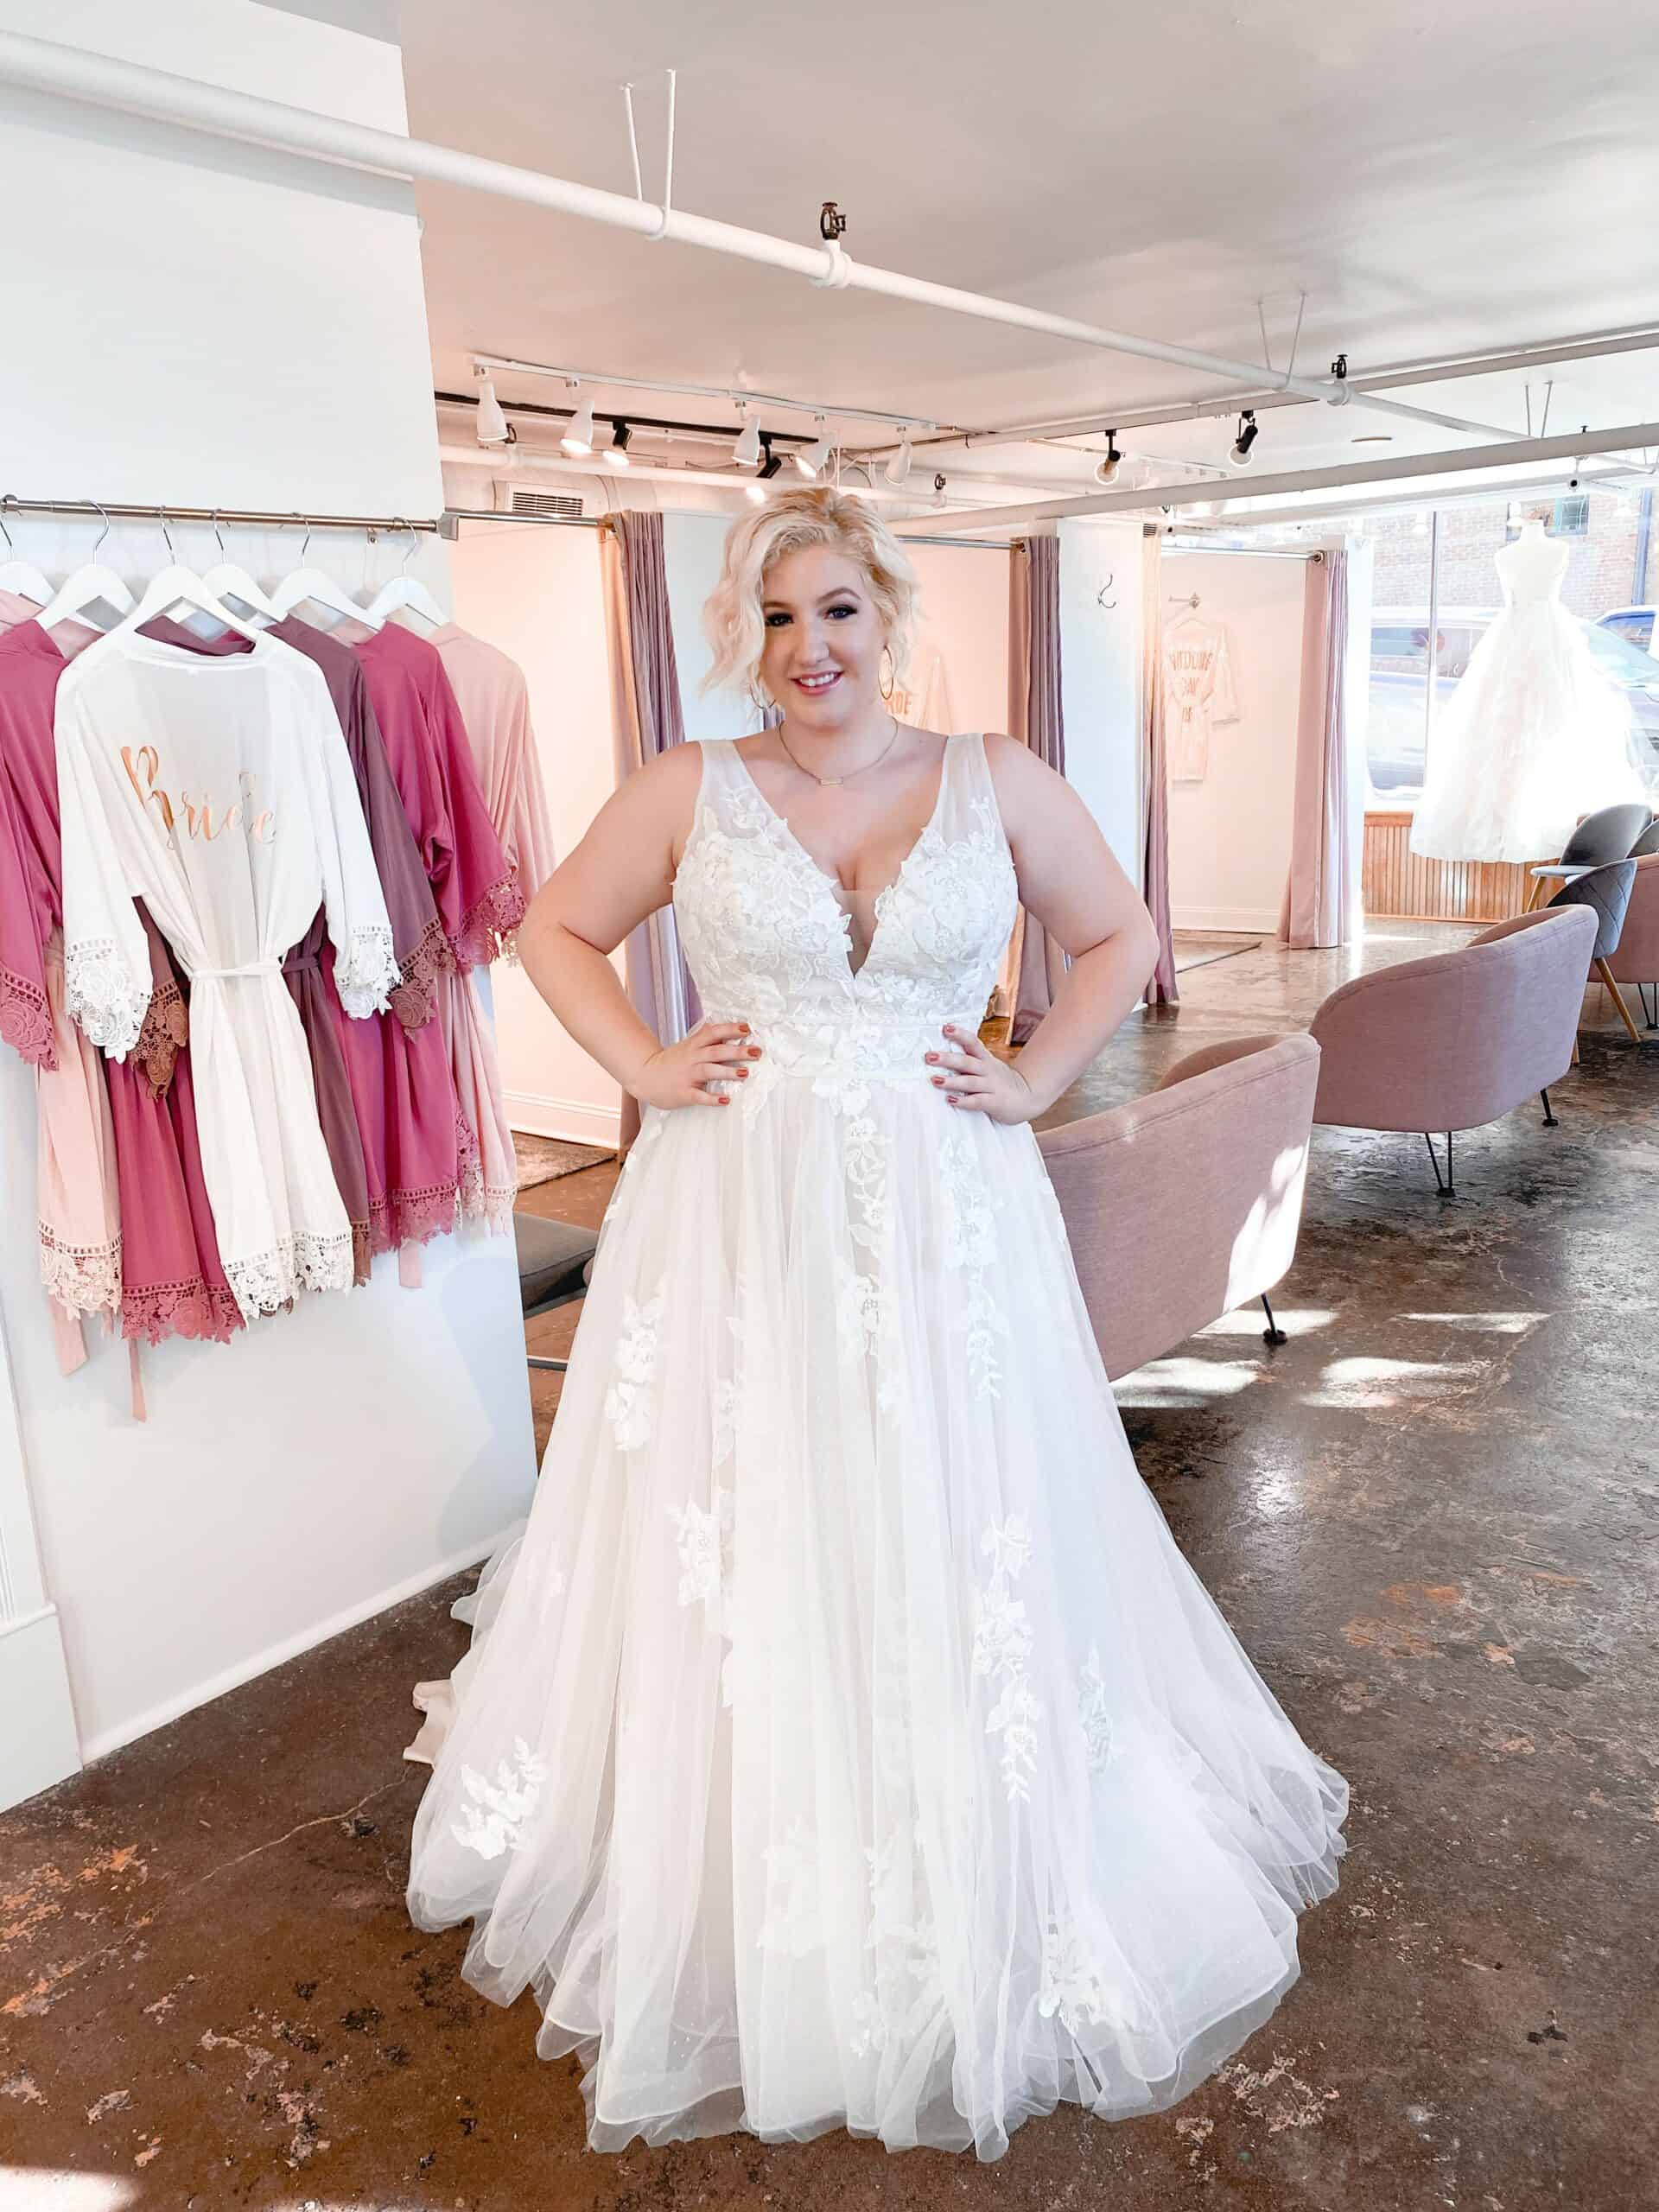 How shopping for a wedding dress traumatized me as a size 12